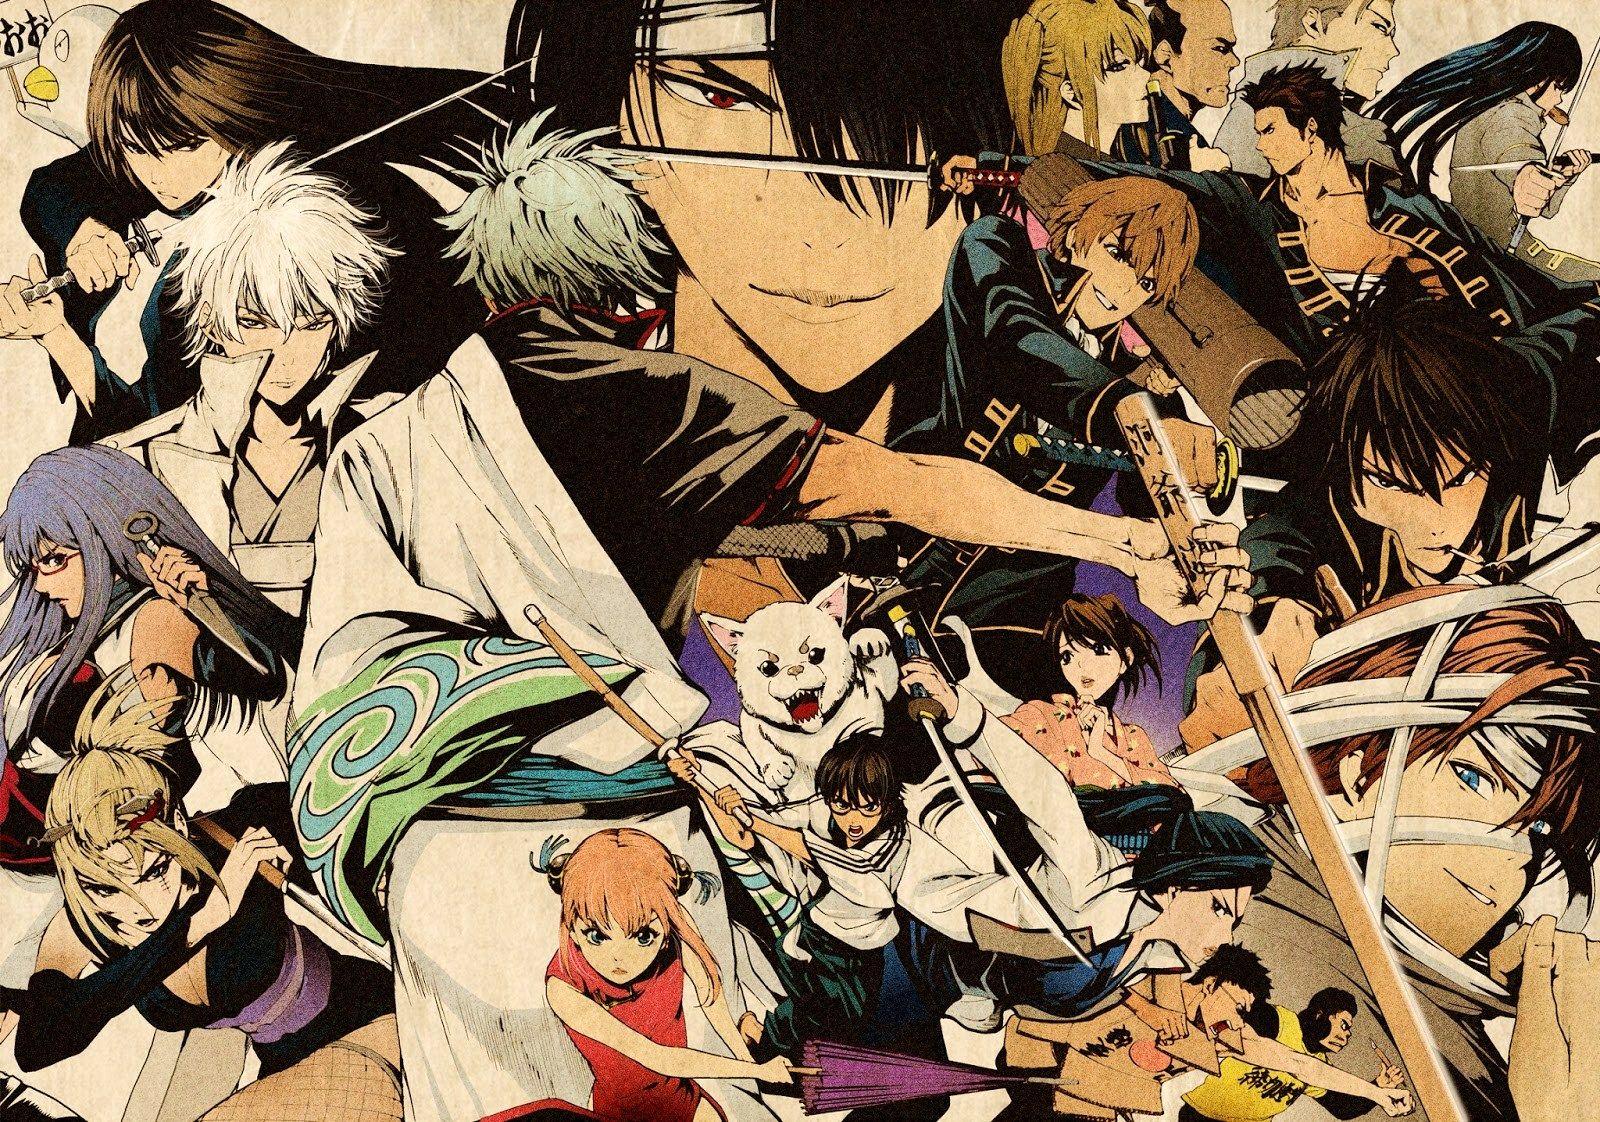 image about Gintama. Anime, Anime characters